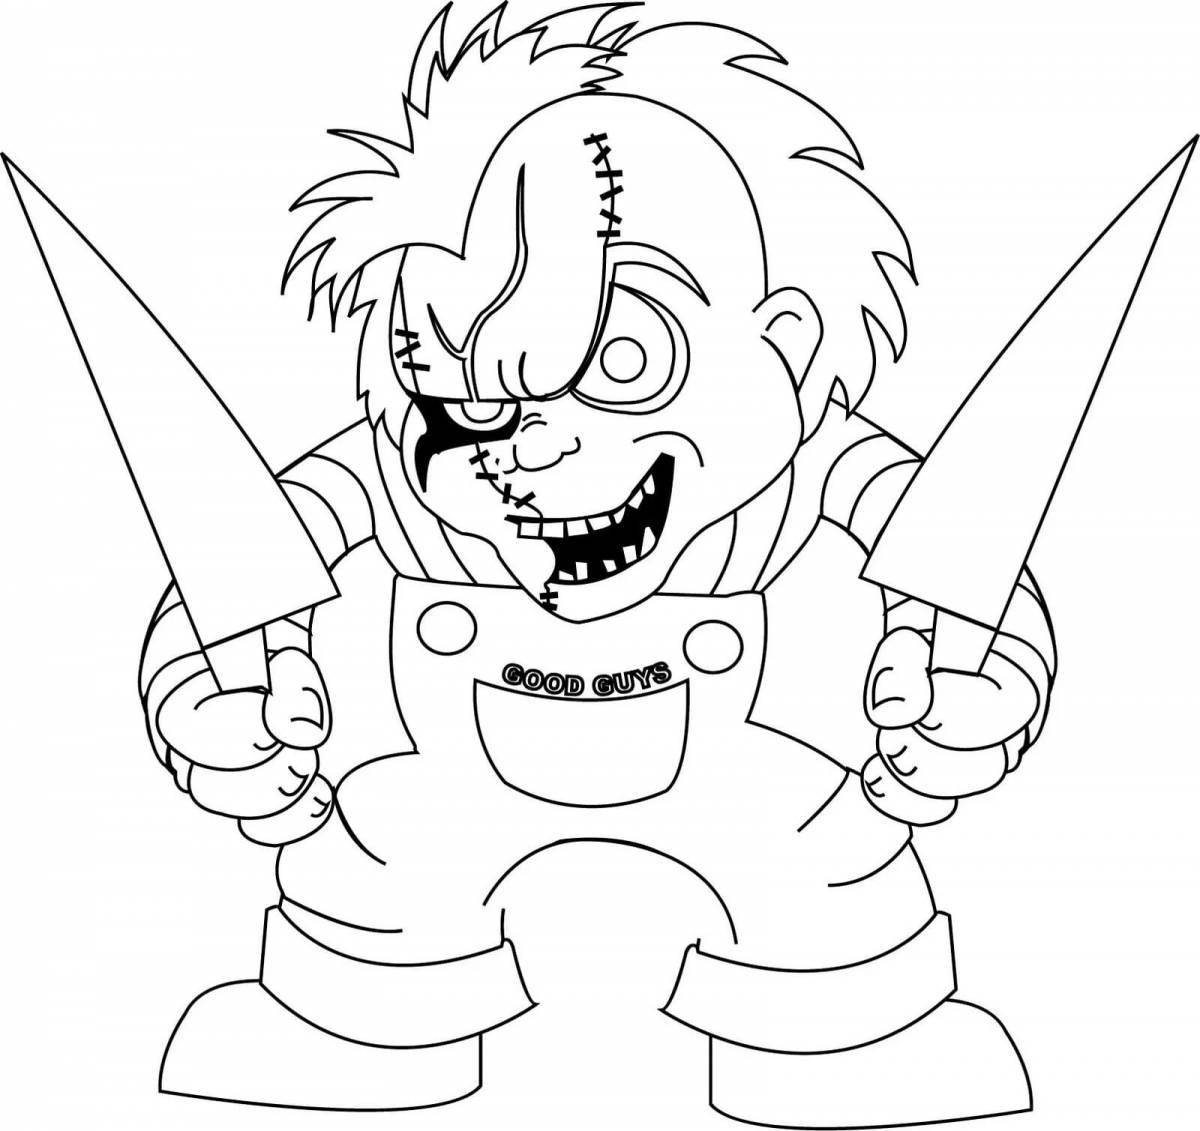 Chilling horror coloring pages